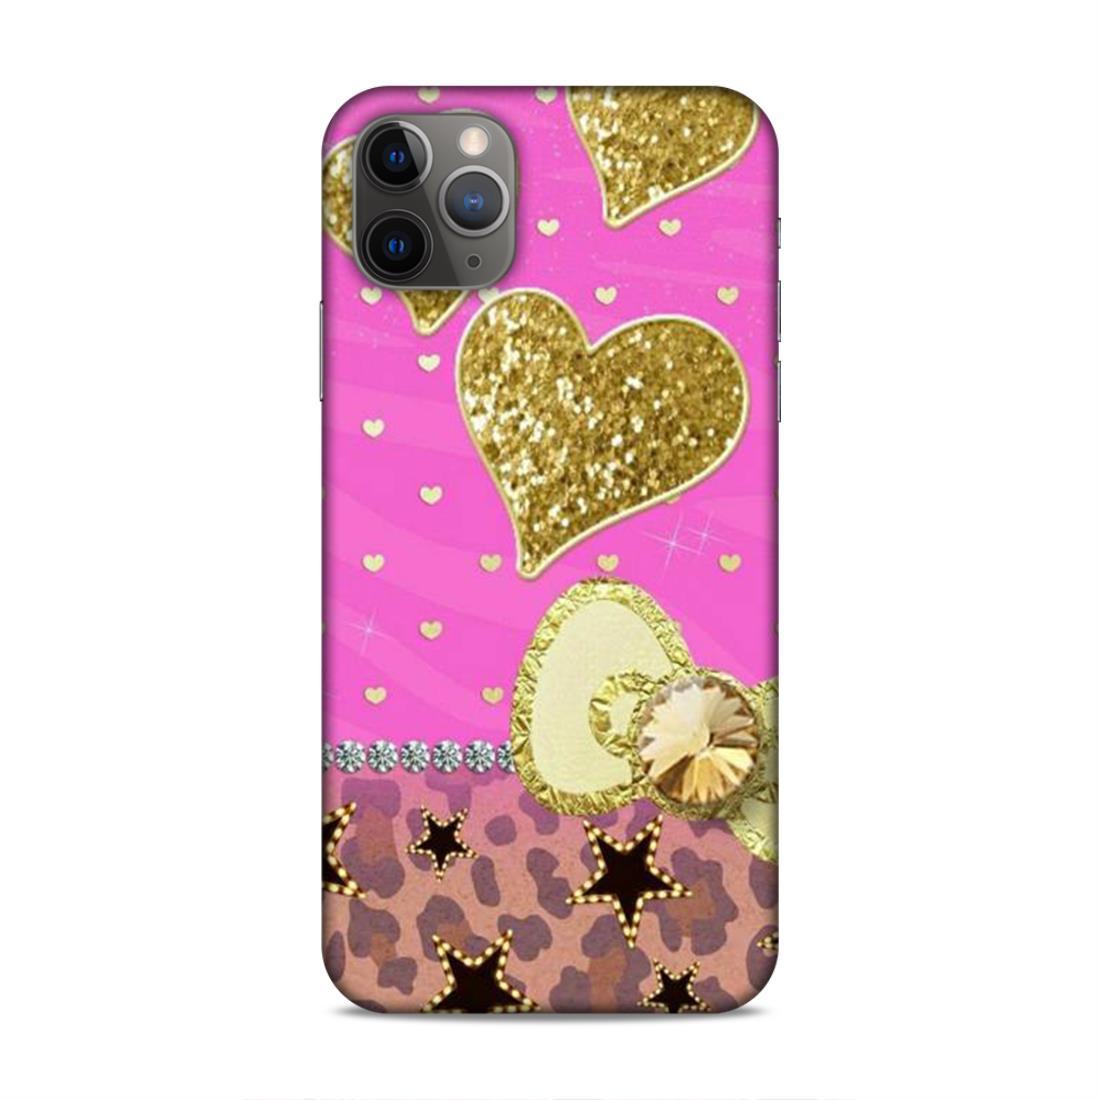 Cute Pink Heart iPhone 11 Pro Max Phone Case Cover